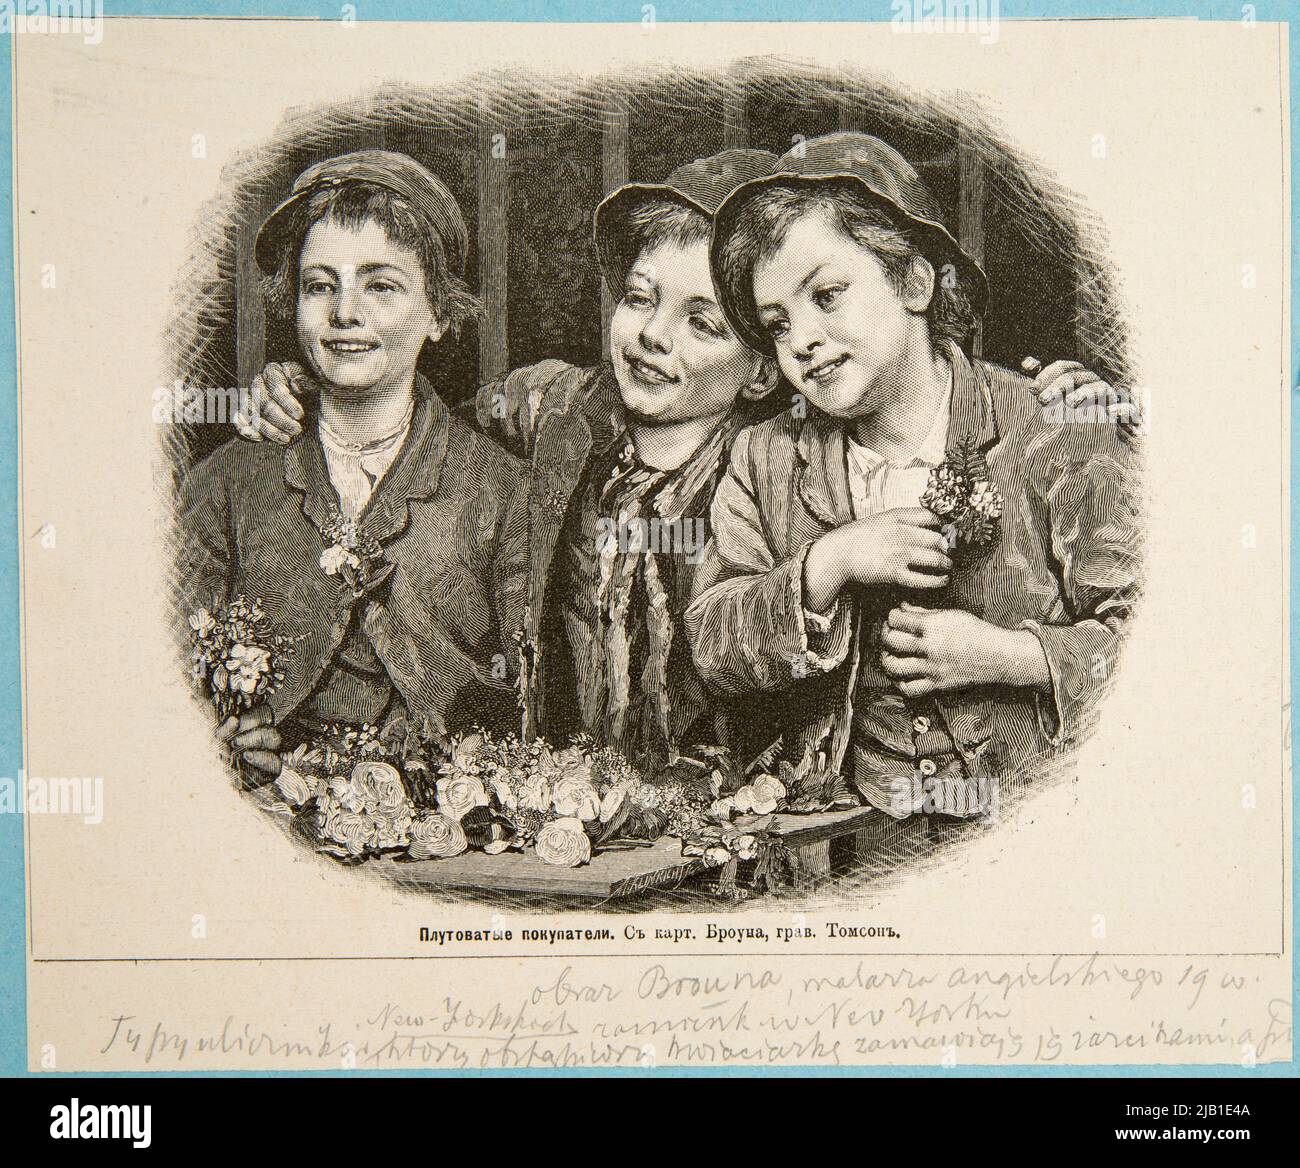 Care buyers according to Brown's painting. A clip from a Russian magazine Klinkicht, Moritz (1849 1932), Tomson (N.N.), Brown (N.N.) Stock Photo